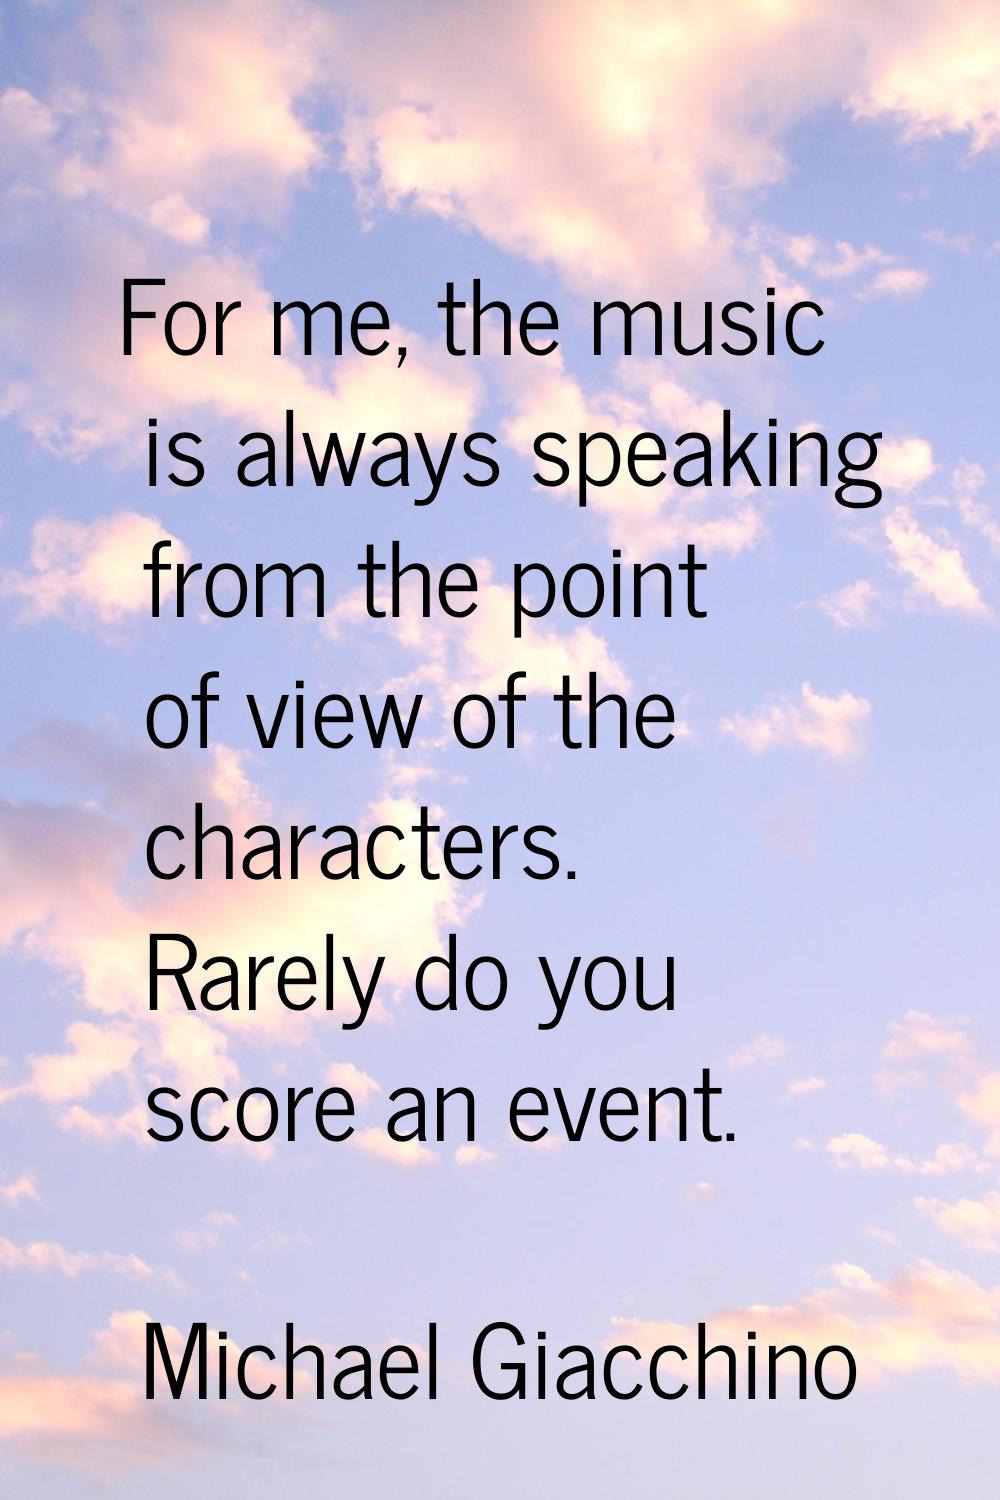 For me, the music is always speaking from the point of view of the characters. Rarely do you score 